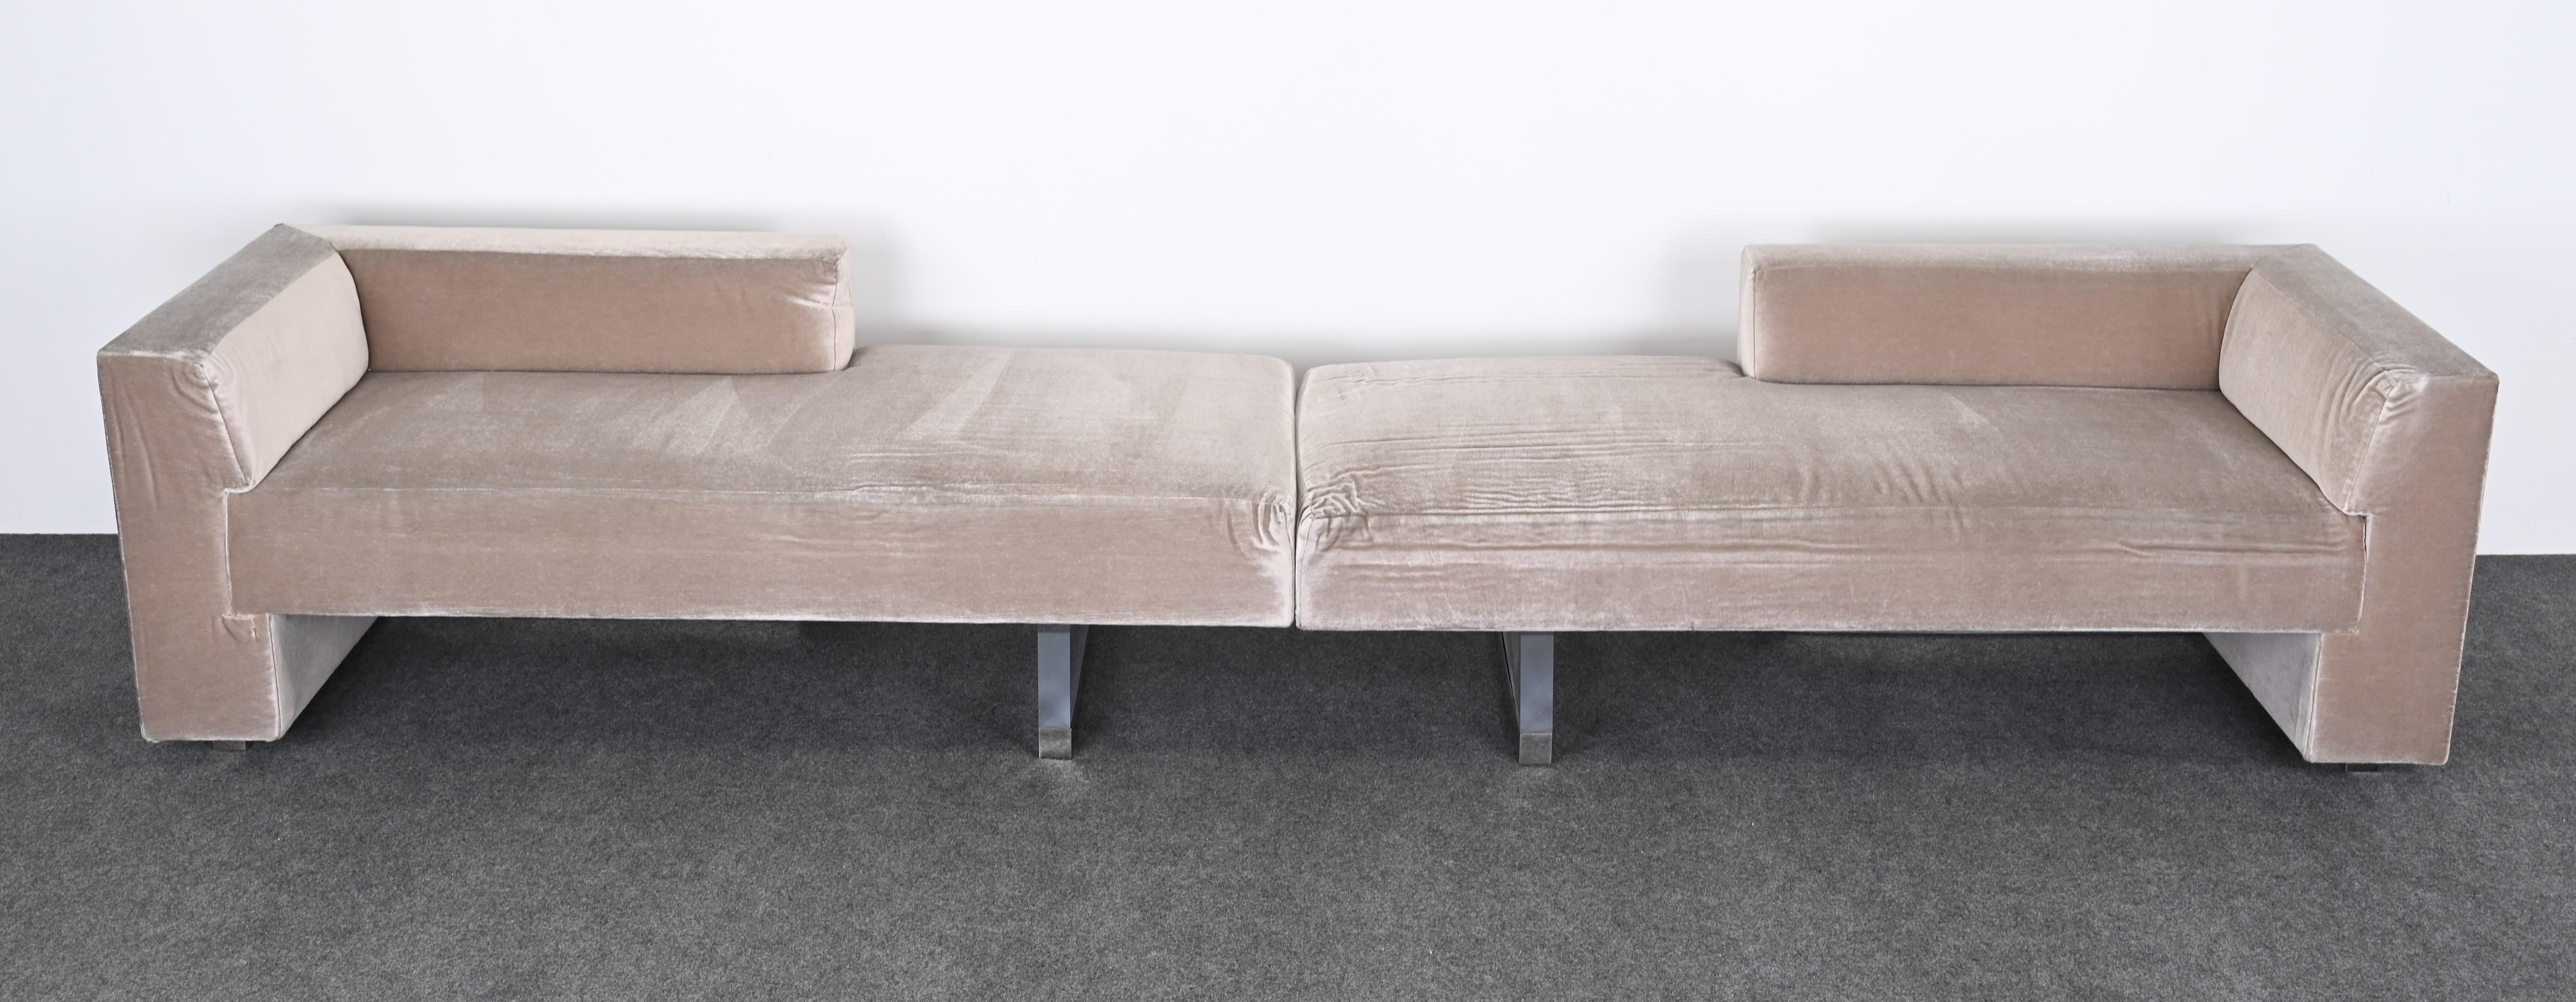 Upholstery Two Piece Sectional Sofas by Vladimir Kagan for Gucci, 1990s